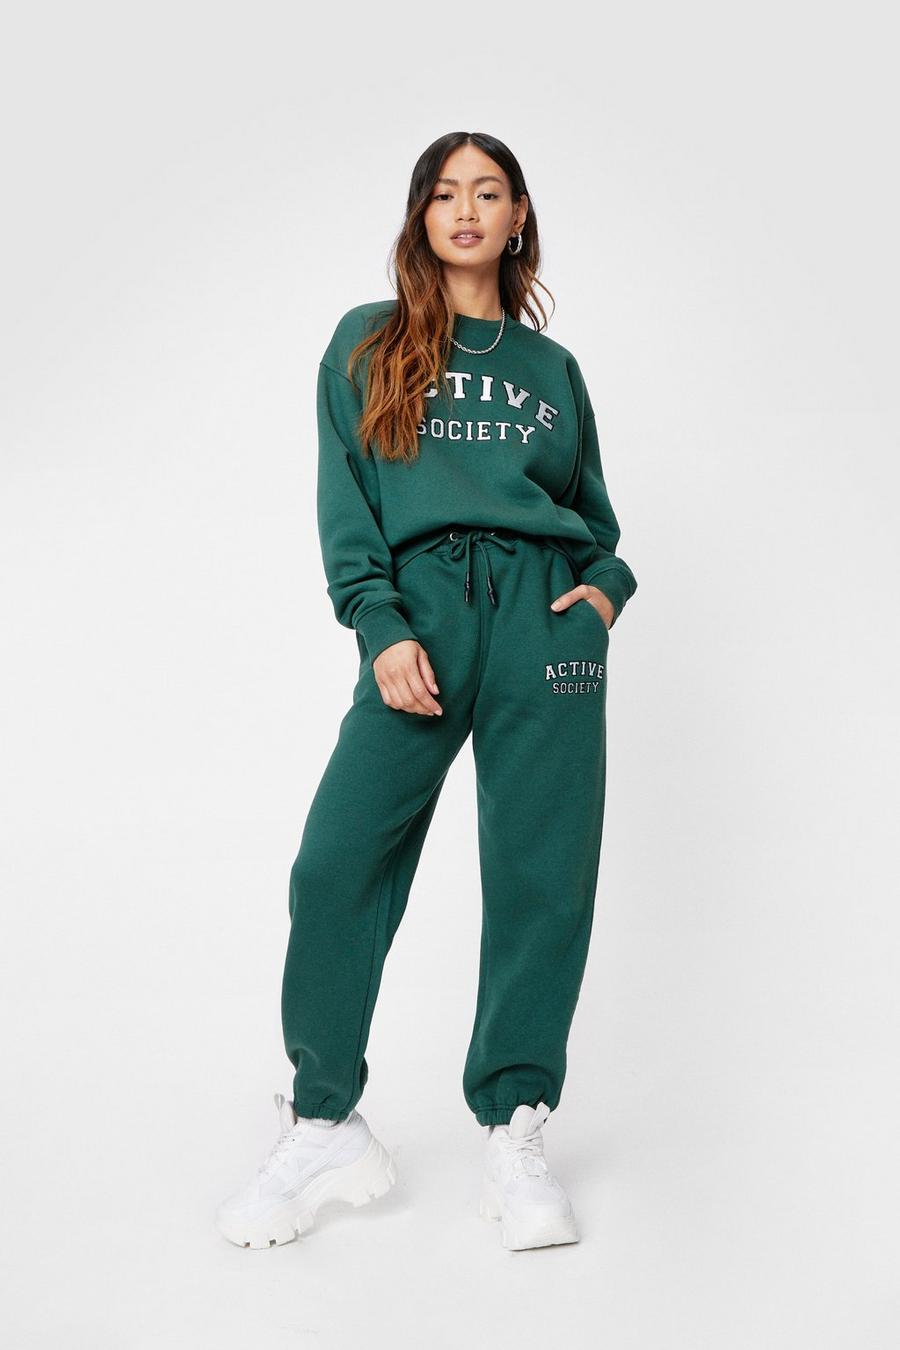 Green Petite Active Society High Waisted Joggers